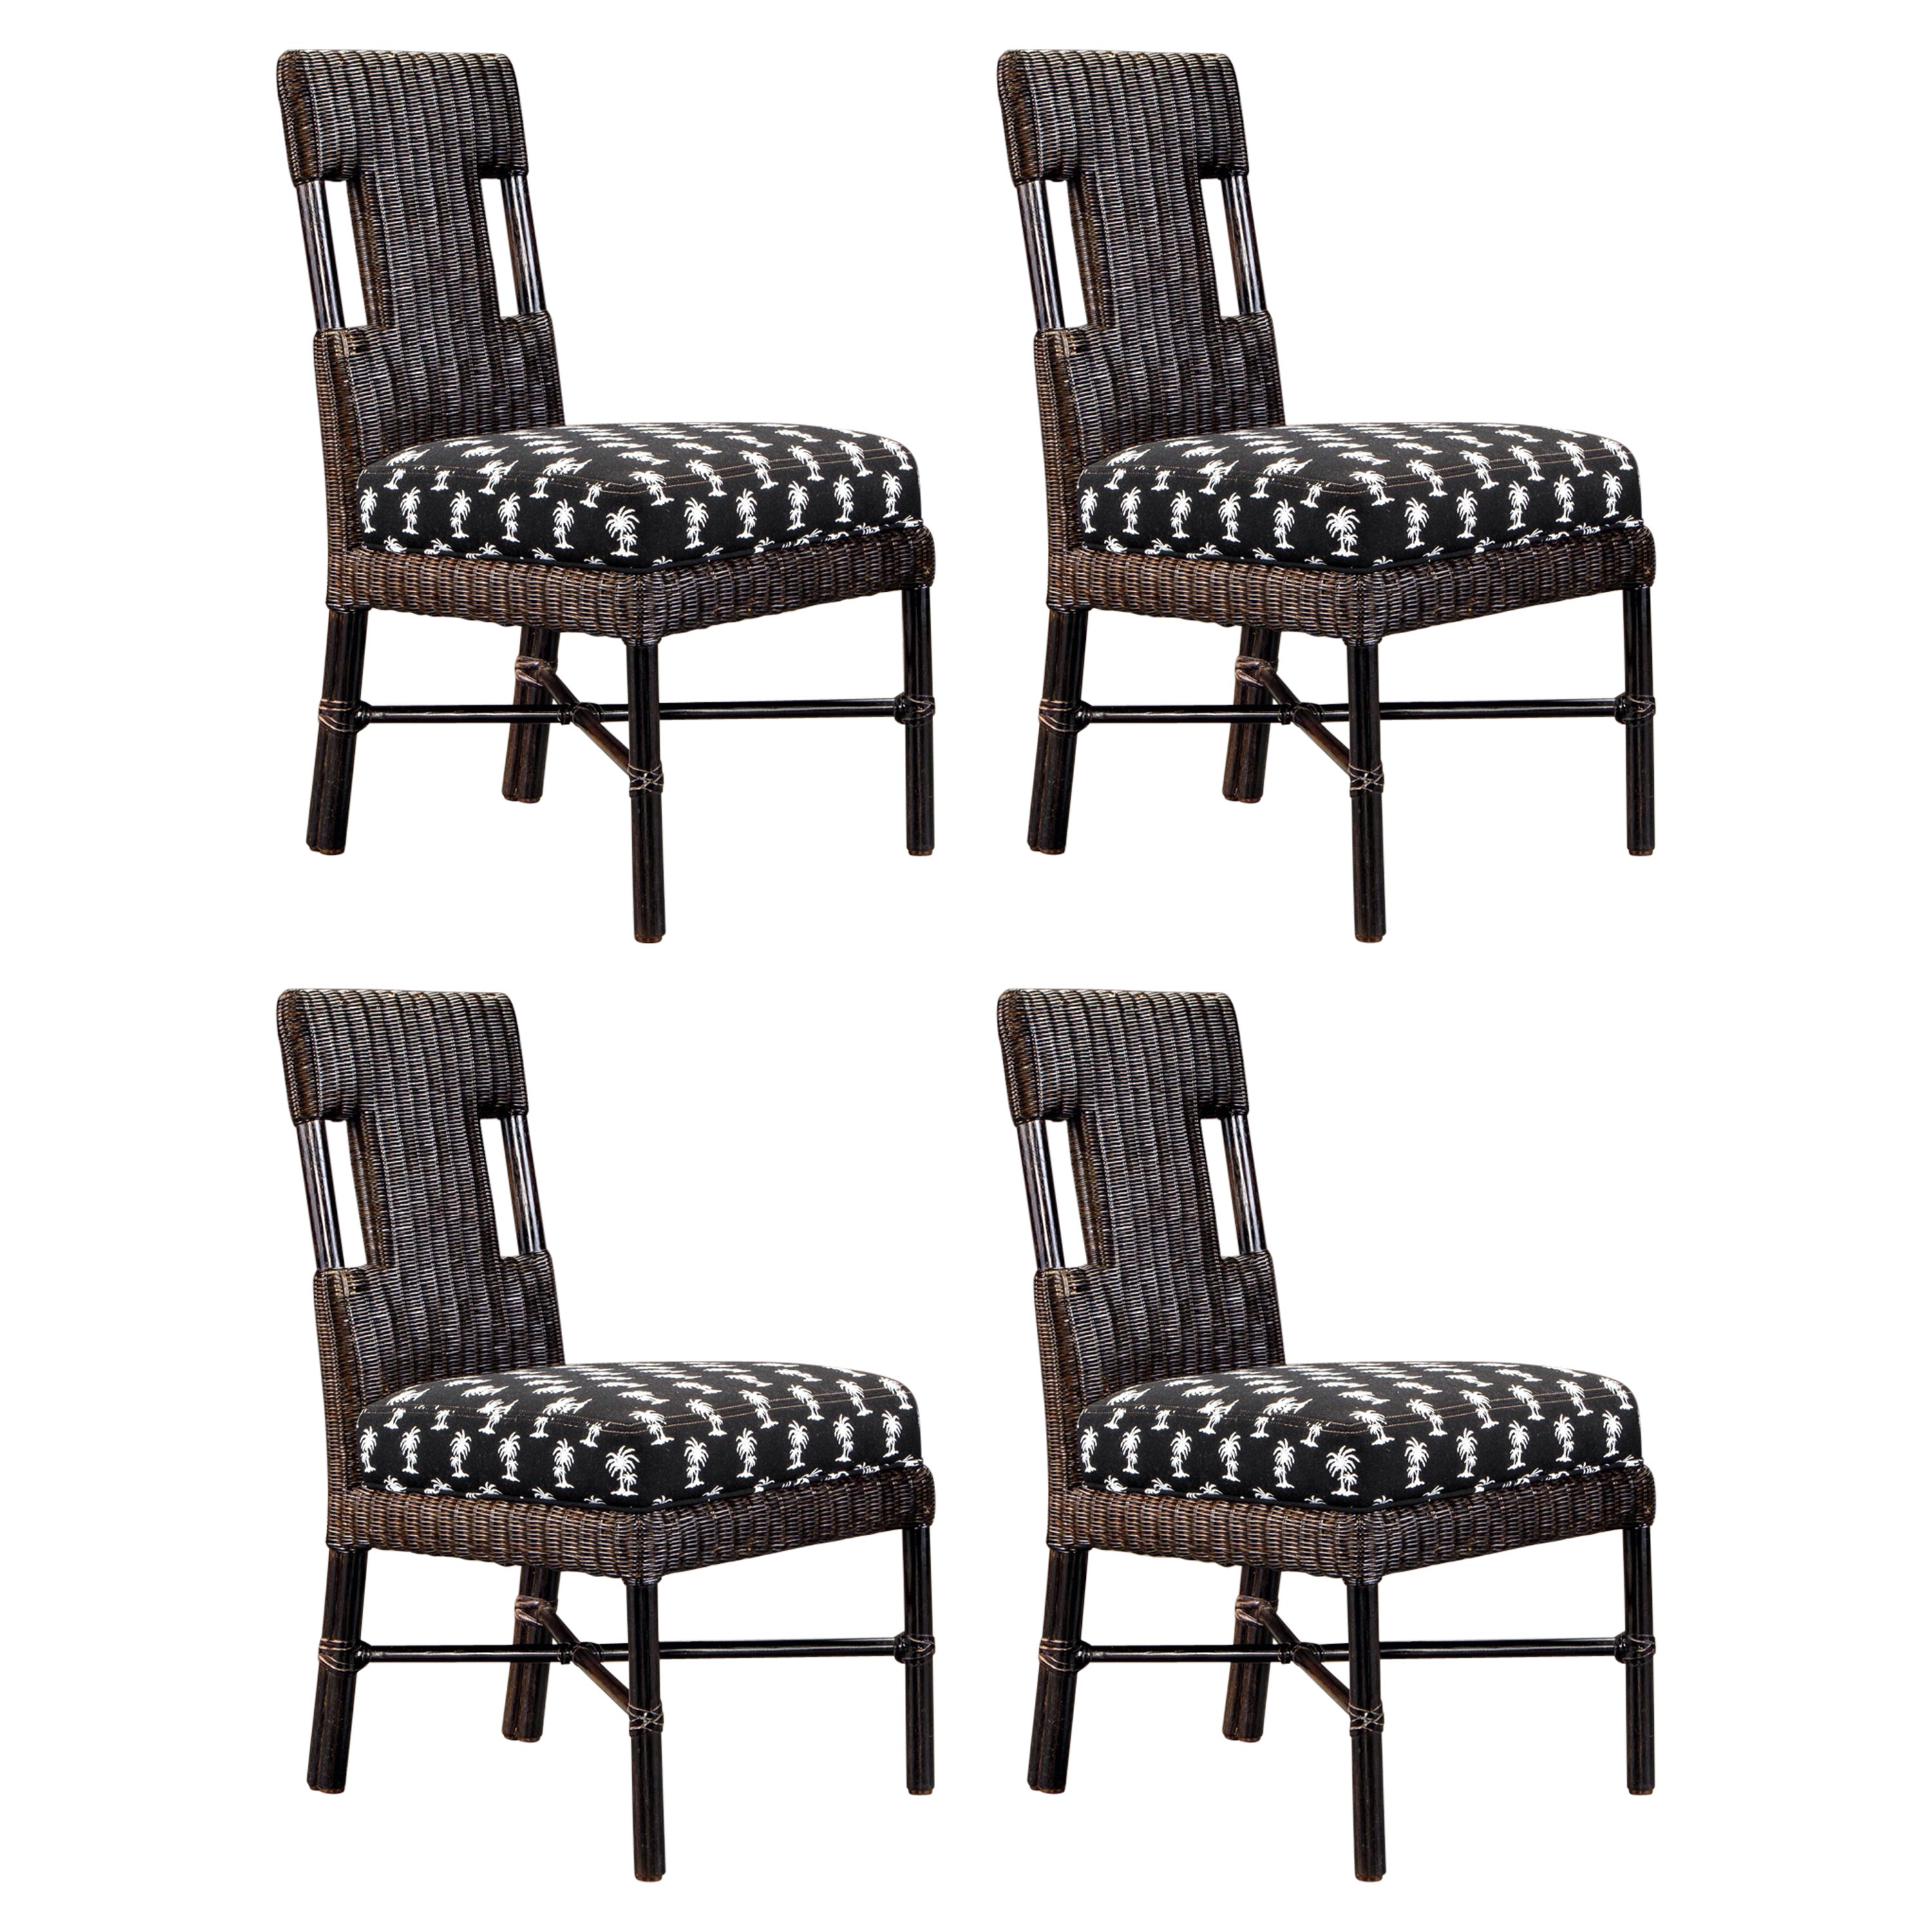 McGuire Rattan and Bamboo Cafe Side Chairs with Palm Tree Print Seats, Signed